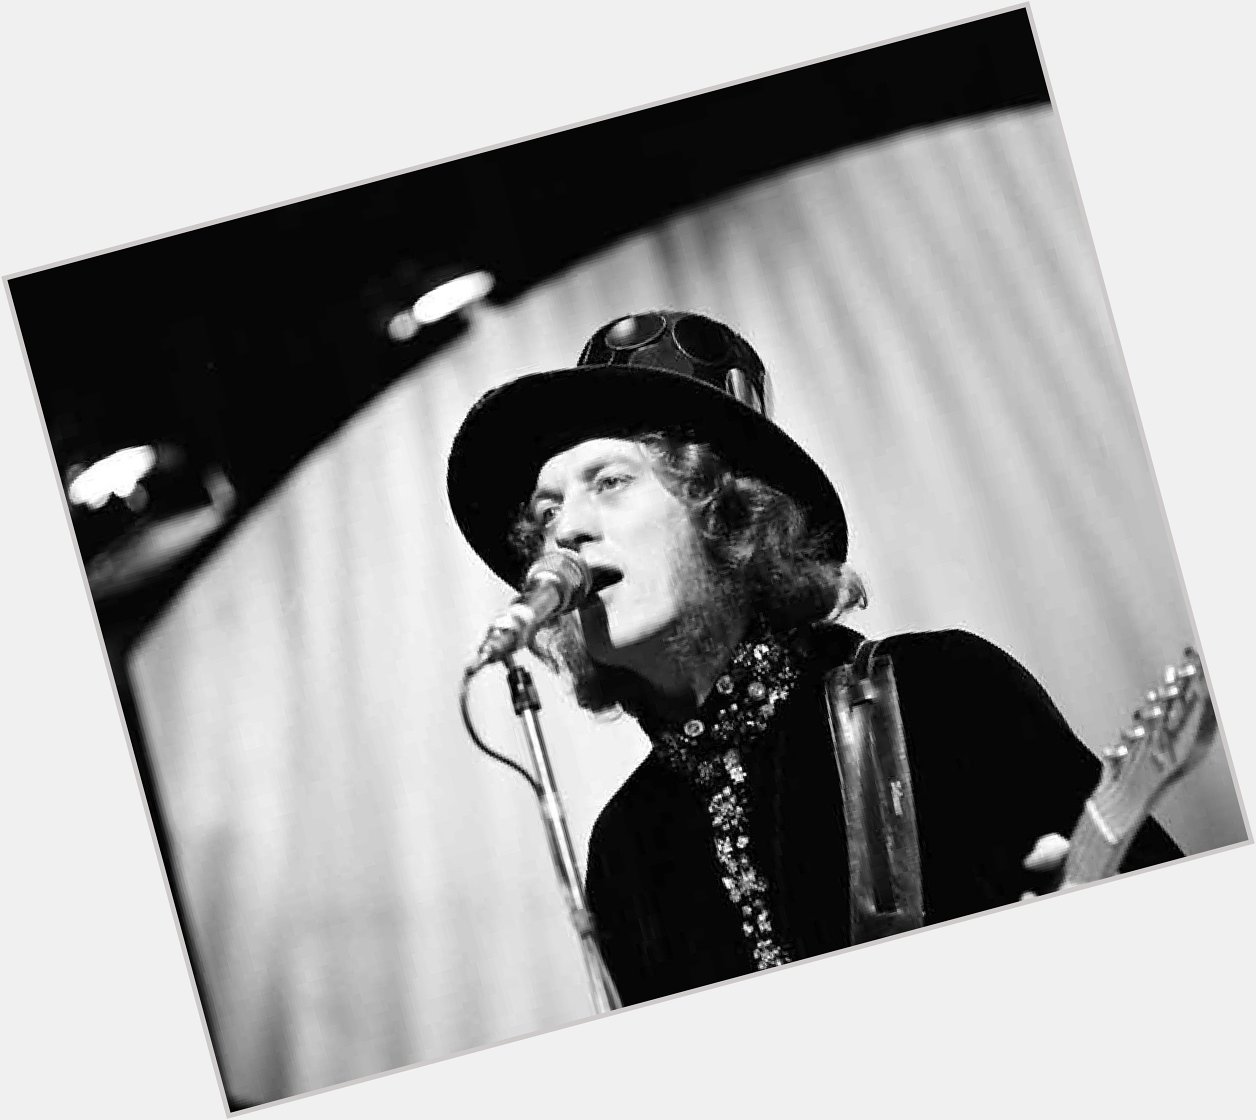 Happy Birthday to Slade singer songwriter Noddy Holder, born on this day in Walsall, Staffordshire in 1946.    